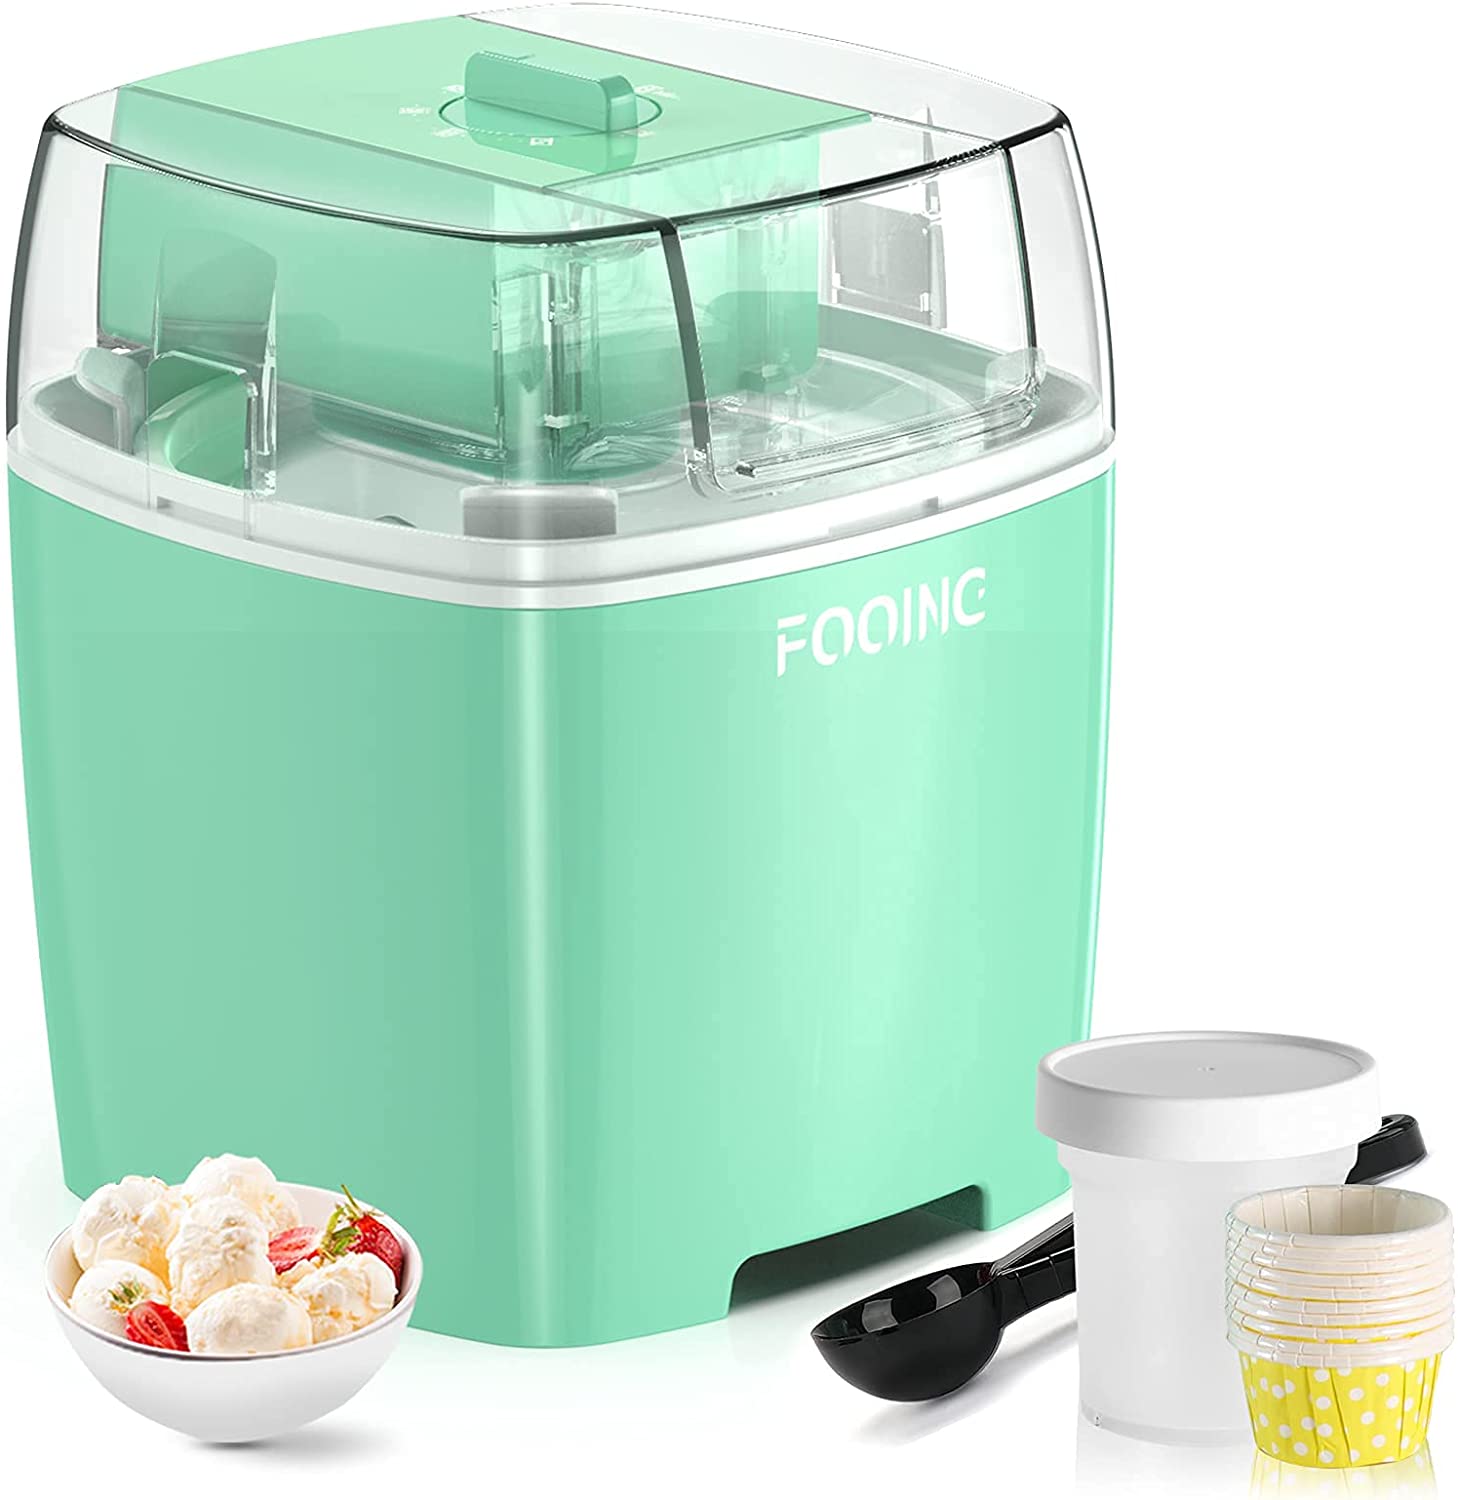 FOOING Soft Ice Cream Maker for Home, Ice Cream Maker, 1.5 L (5 to 30 Minutes), Stainless Steel Home Dinner Ice Cream Maker, Suitable for Sorbet, Frozen Yoghurt and Ice Cream, Includes Recipe and Paper Cups